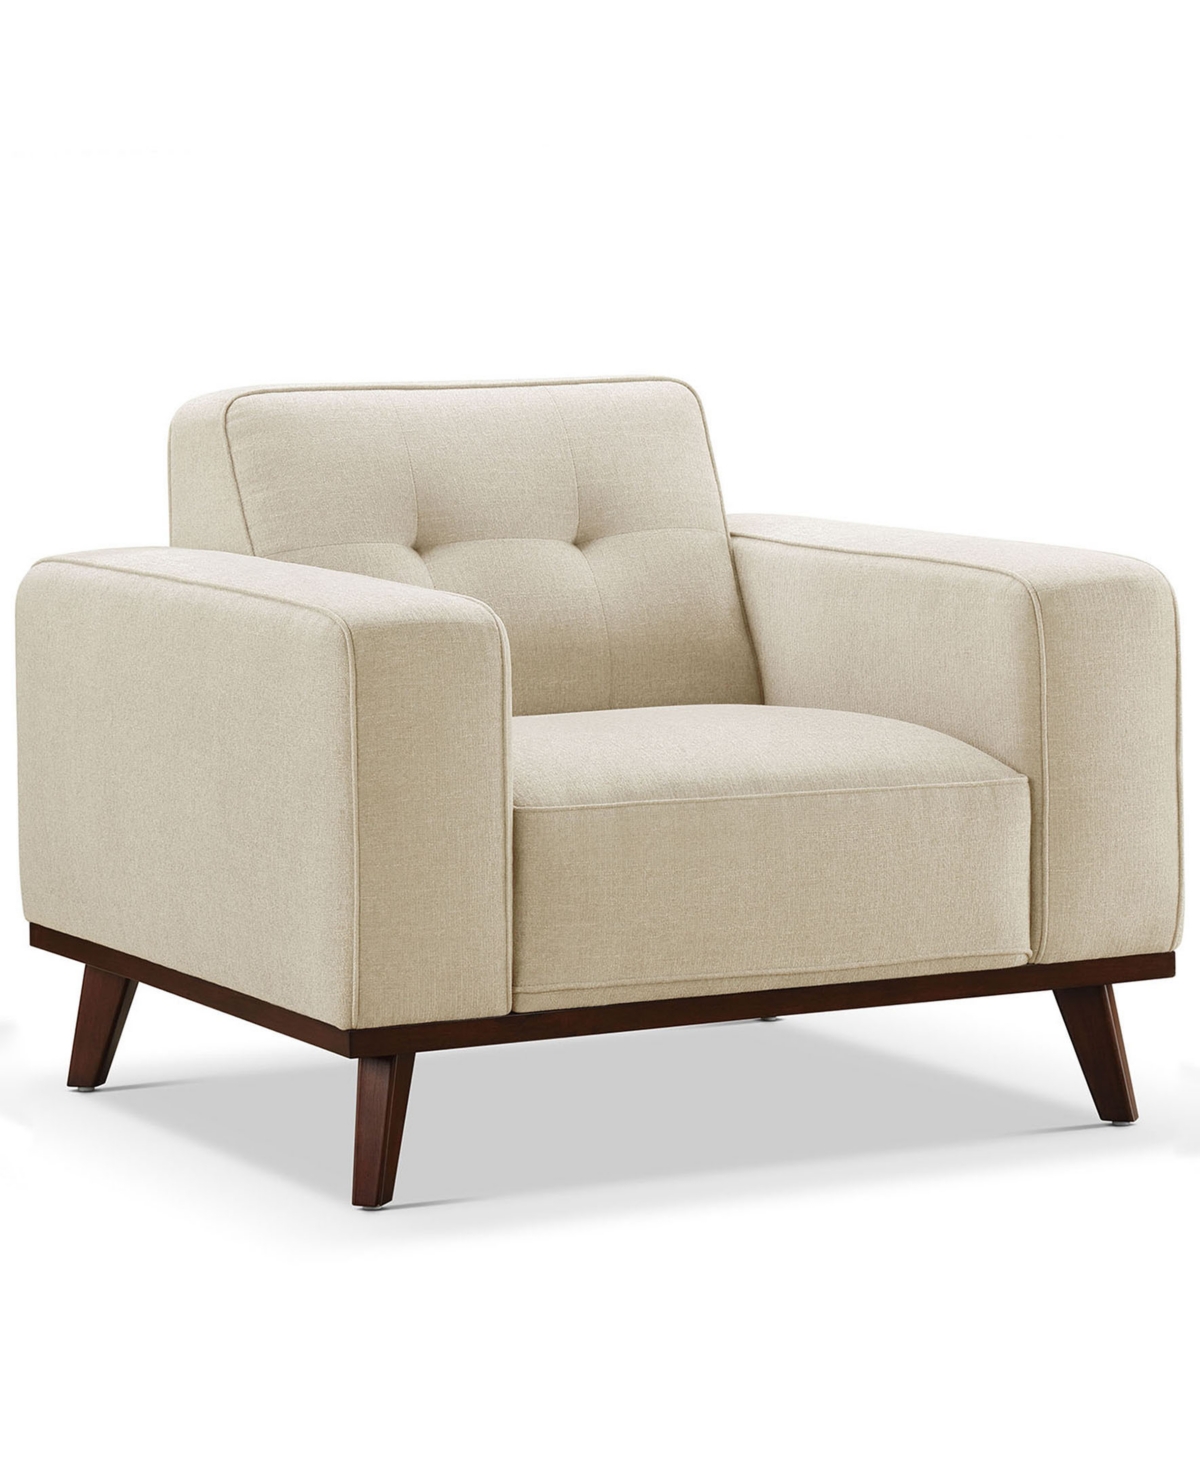 Abbyson Living Vicenza 42" Mid-century Upholstered Chair In Beige